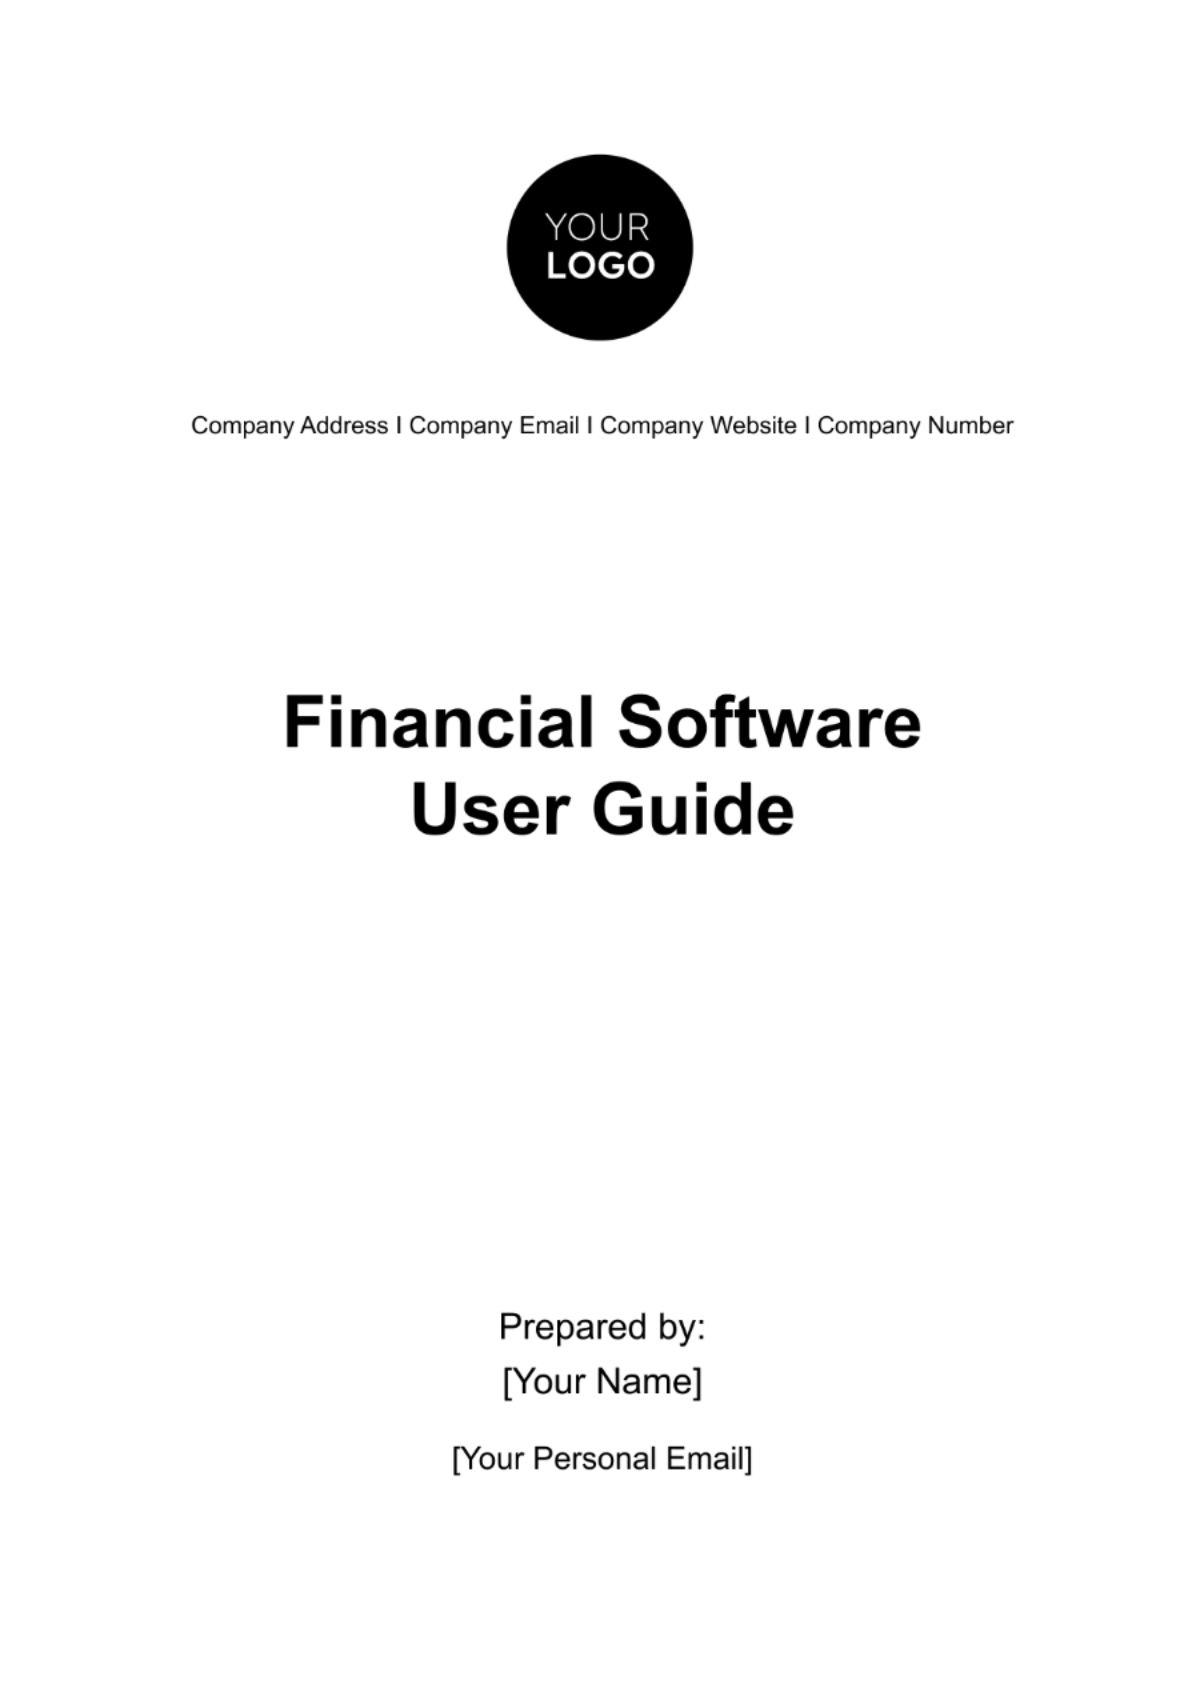 Financial Software User Guide Template